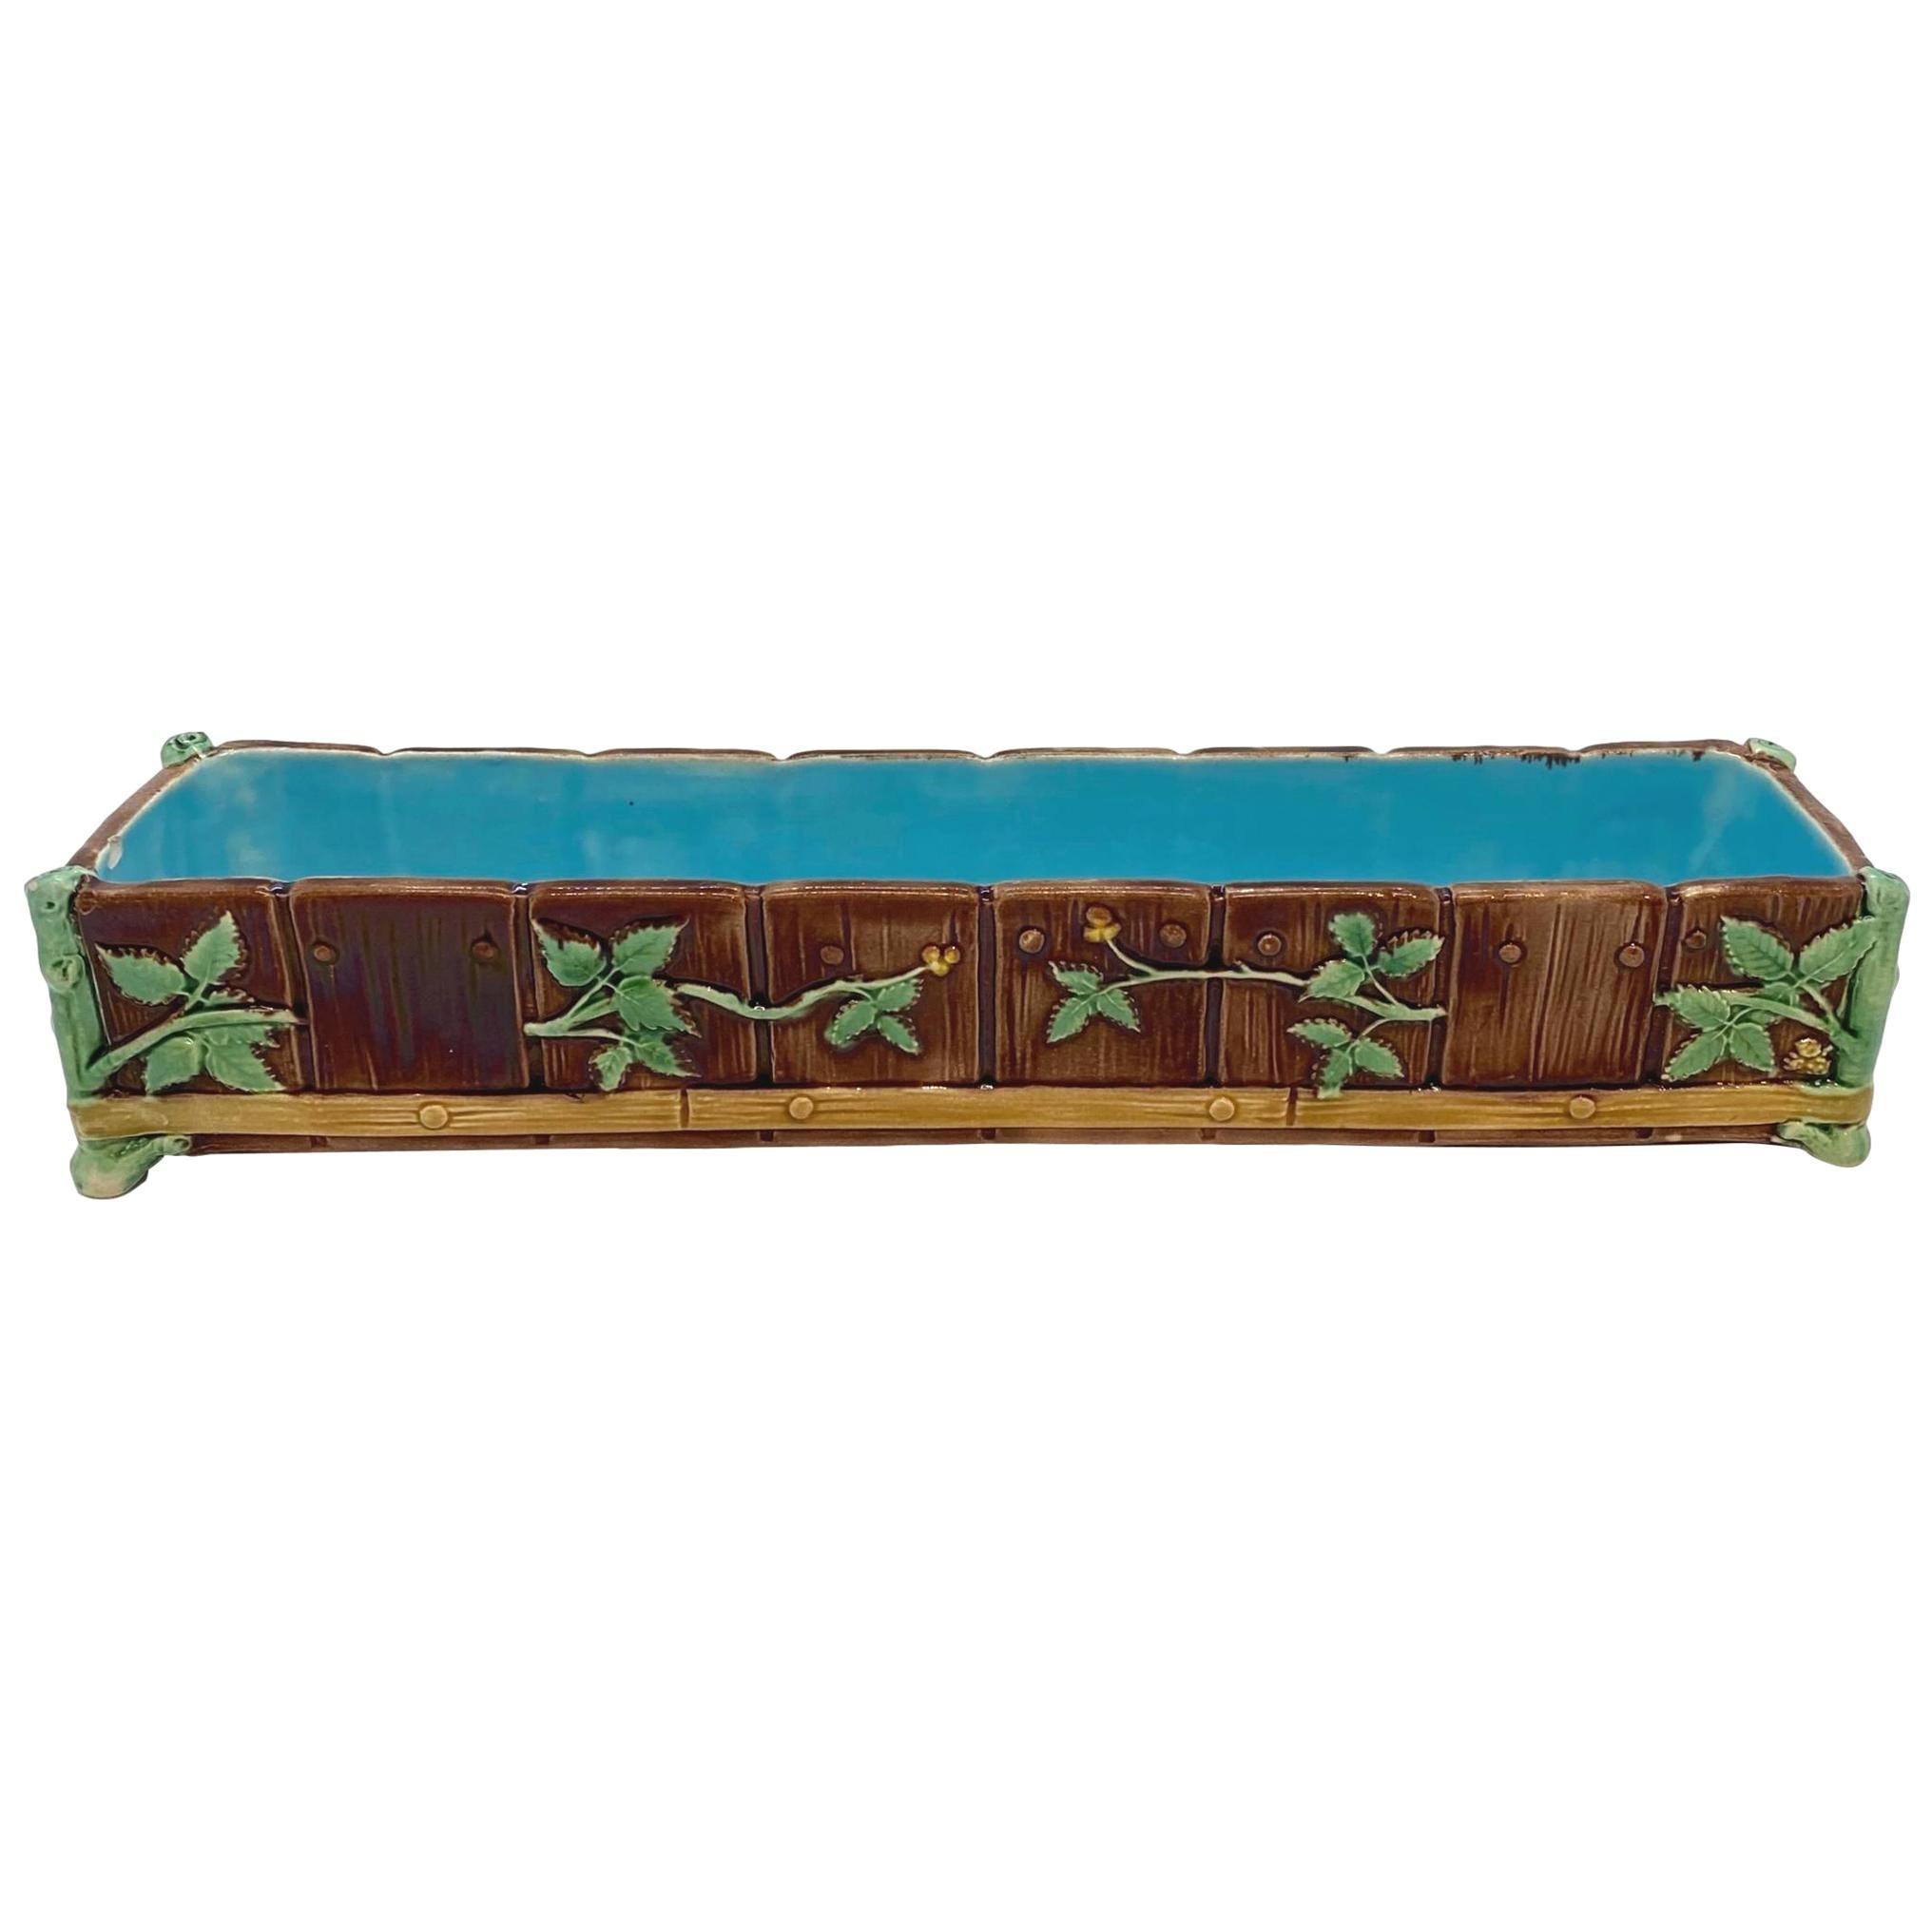 Minton Majolica Small Jardinière Flower Trough Singed, Dated 1871